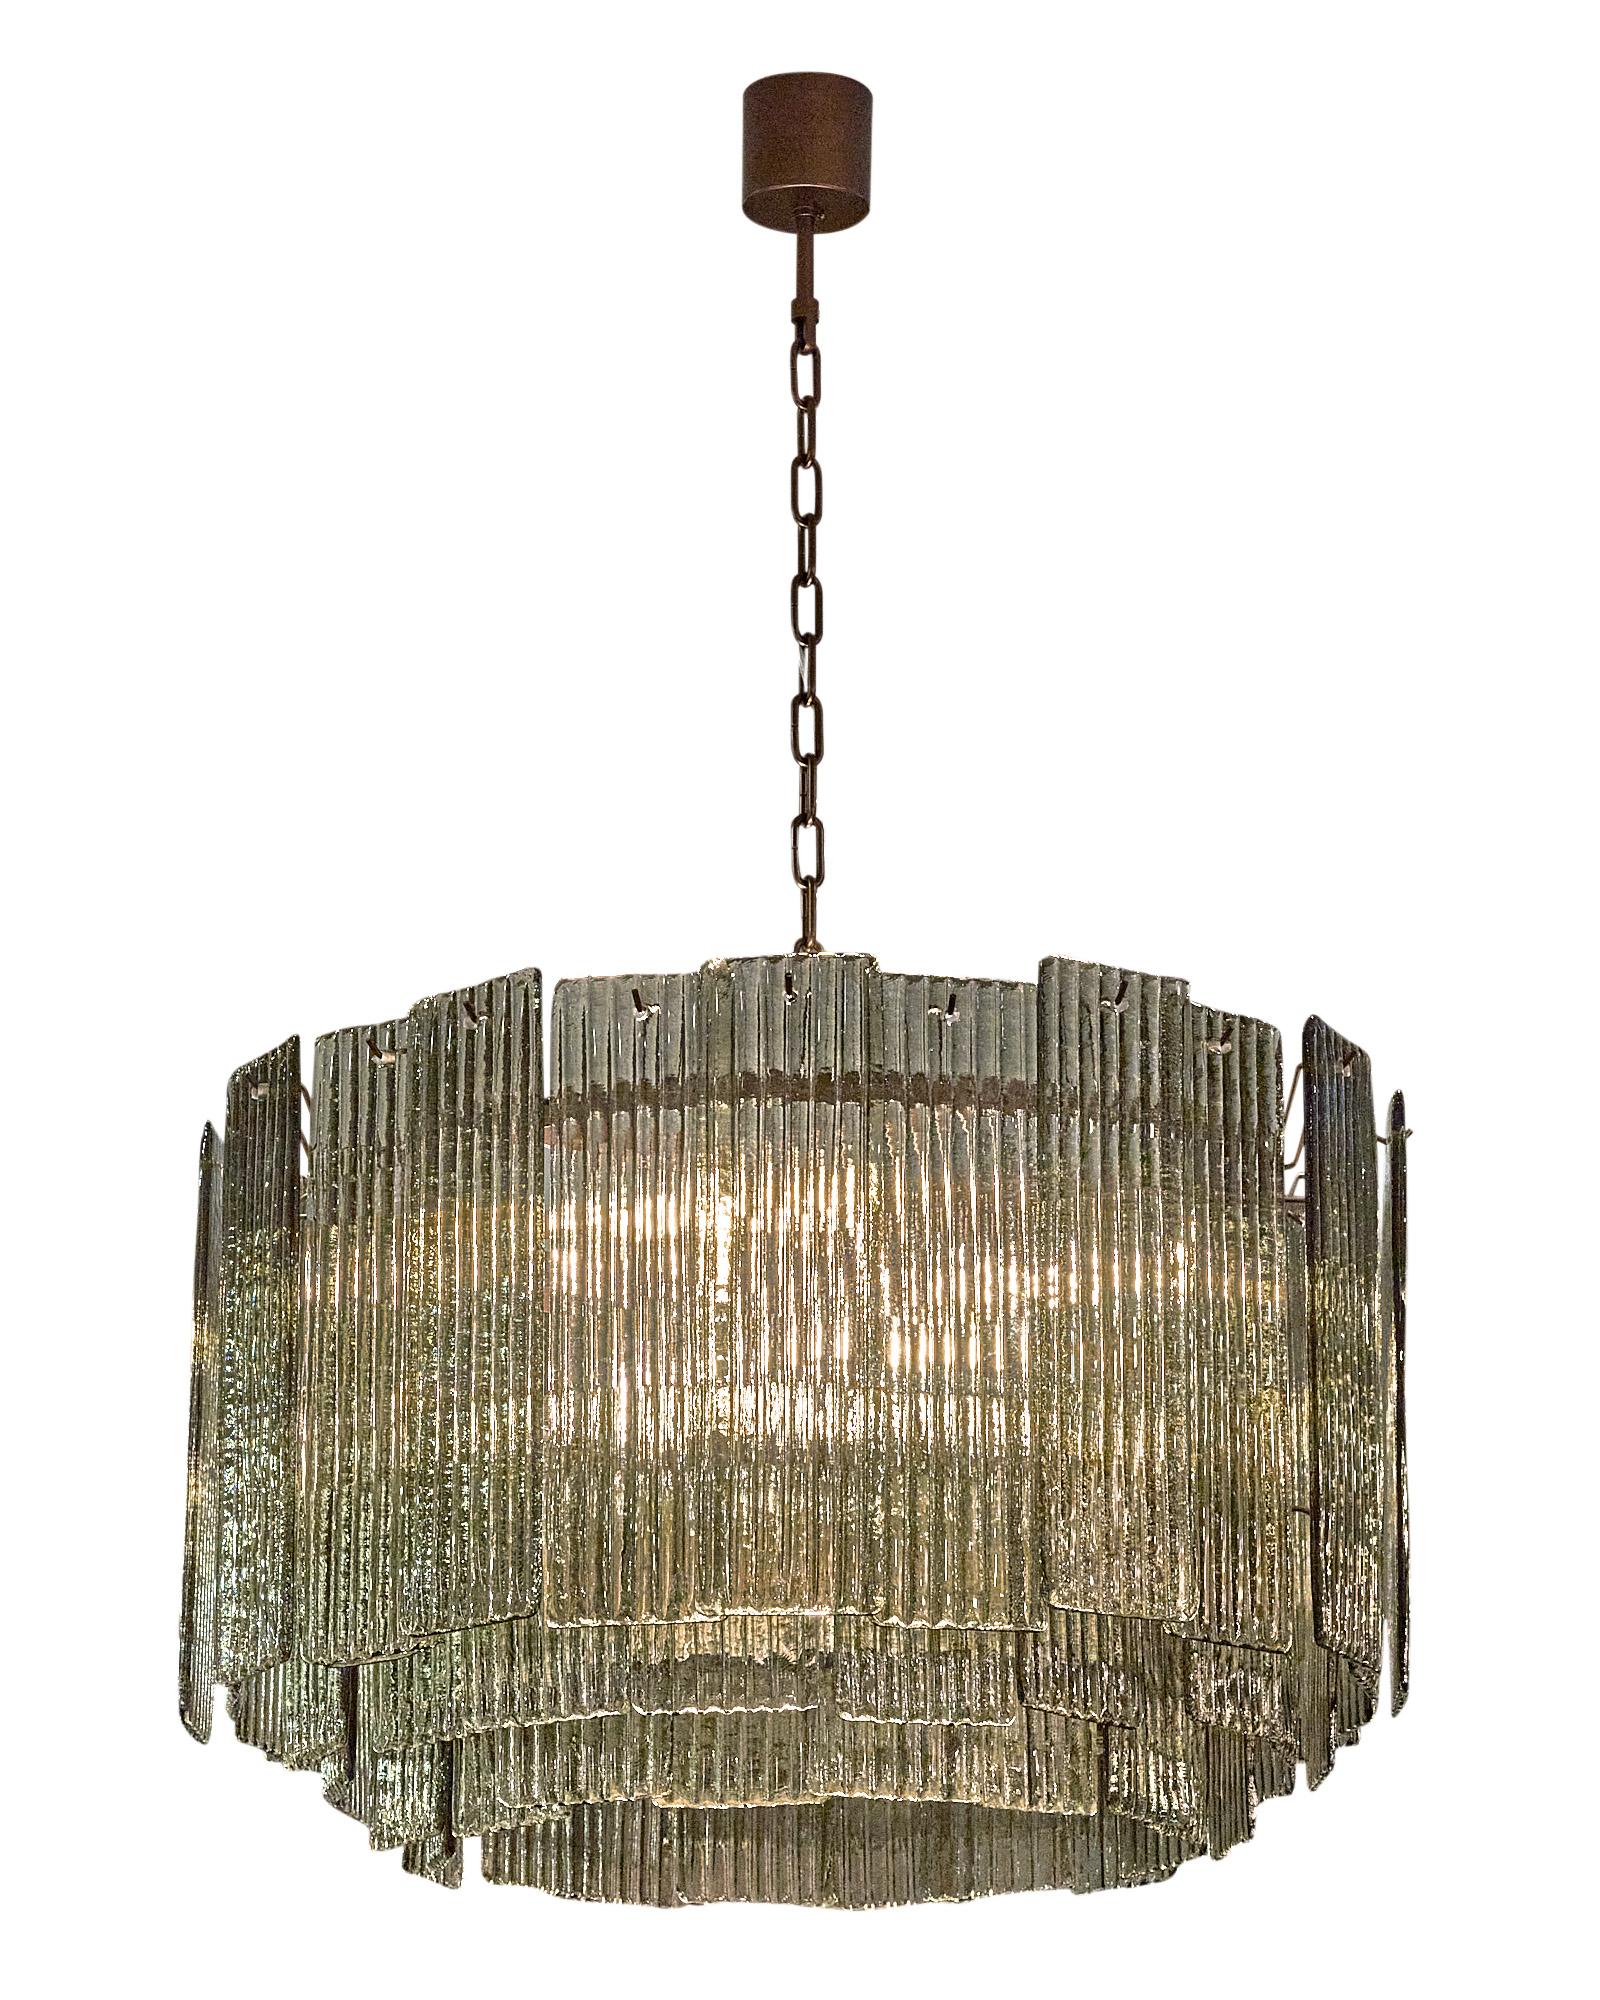 Murano Glass “a piastre” chandelier by Alberto Dona. This piece is a stunning; bold fixture with an array of overlapping plates of hand-blown and molded Murano glass. The textured glass elements are in a beautiful smoked shade of gray and hang on a